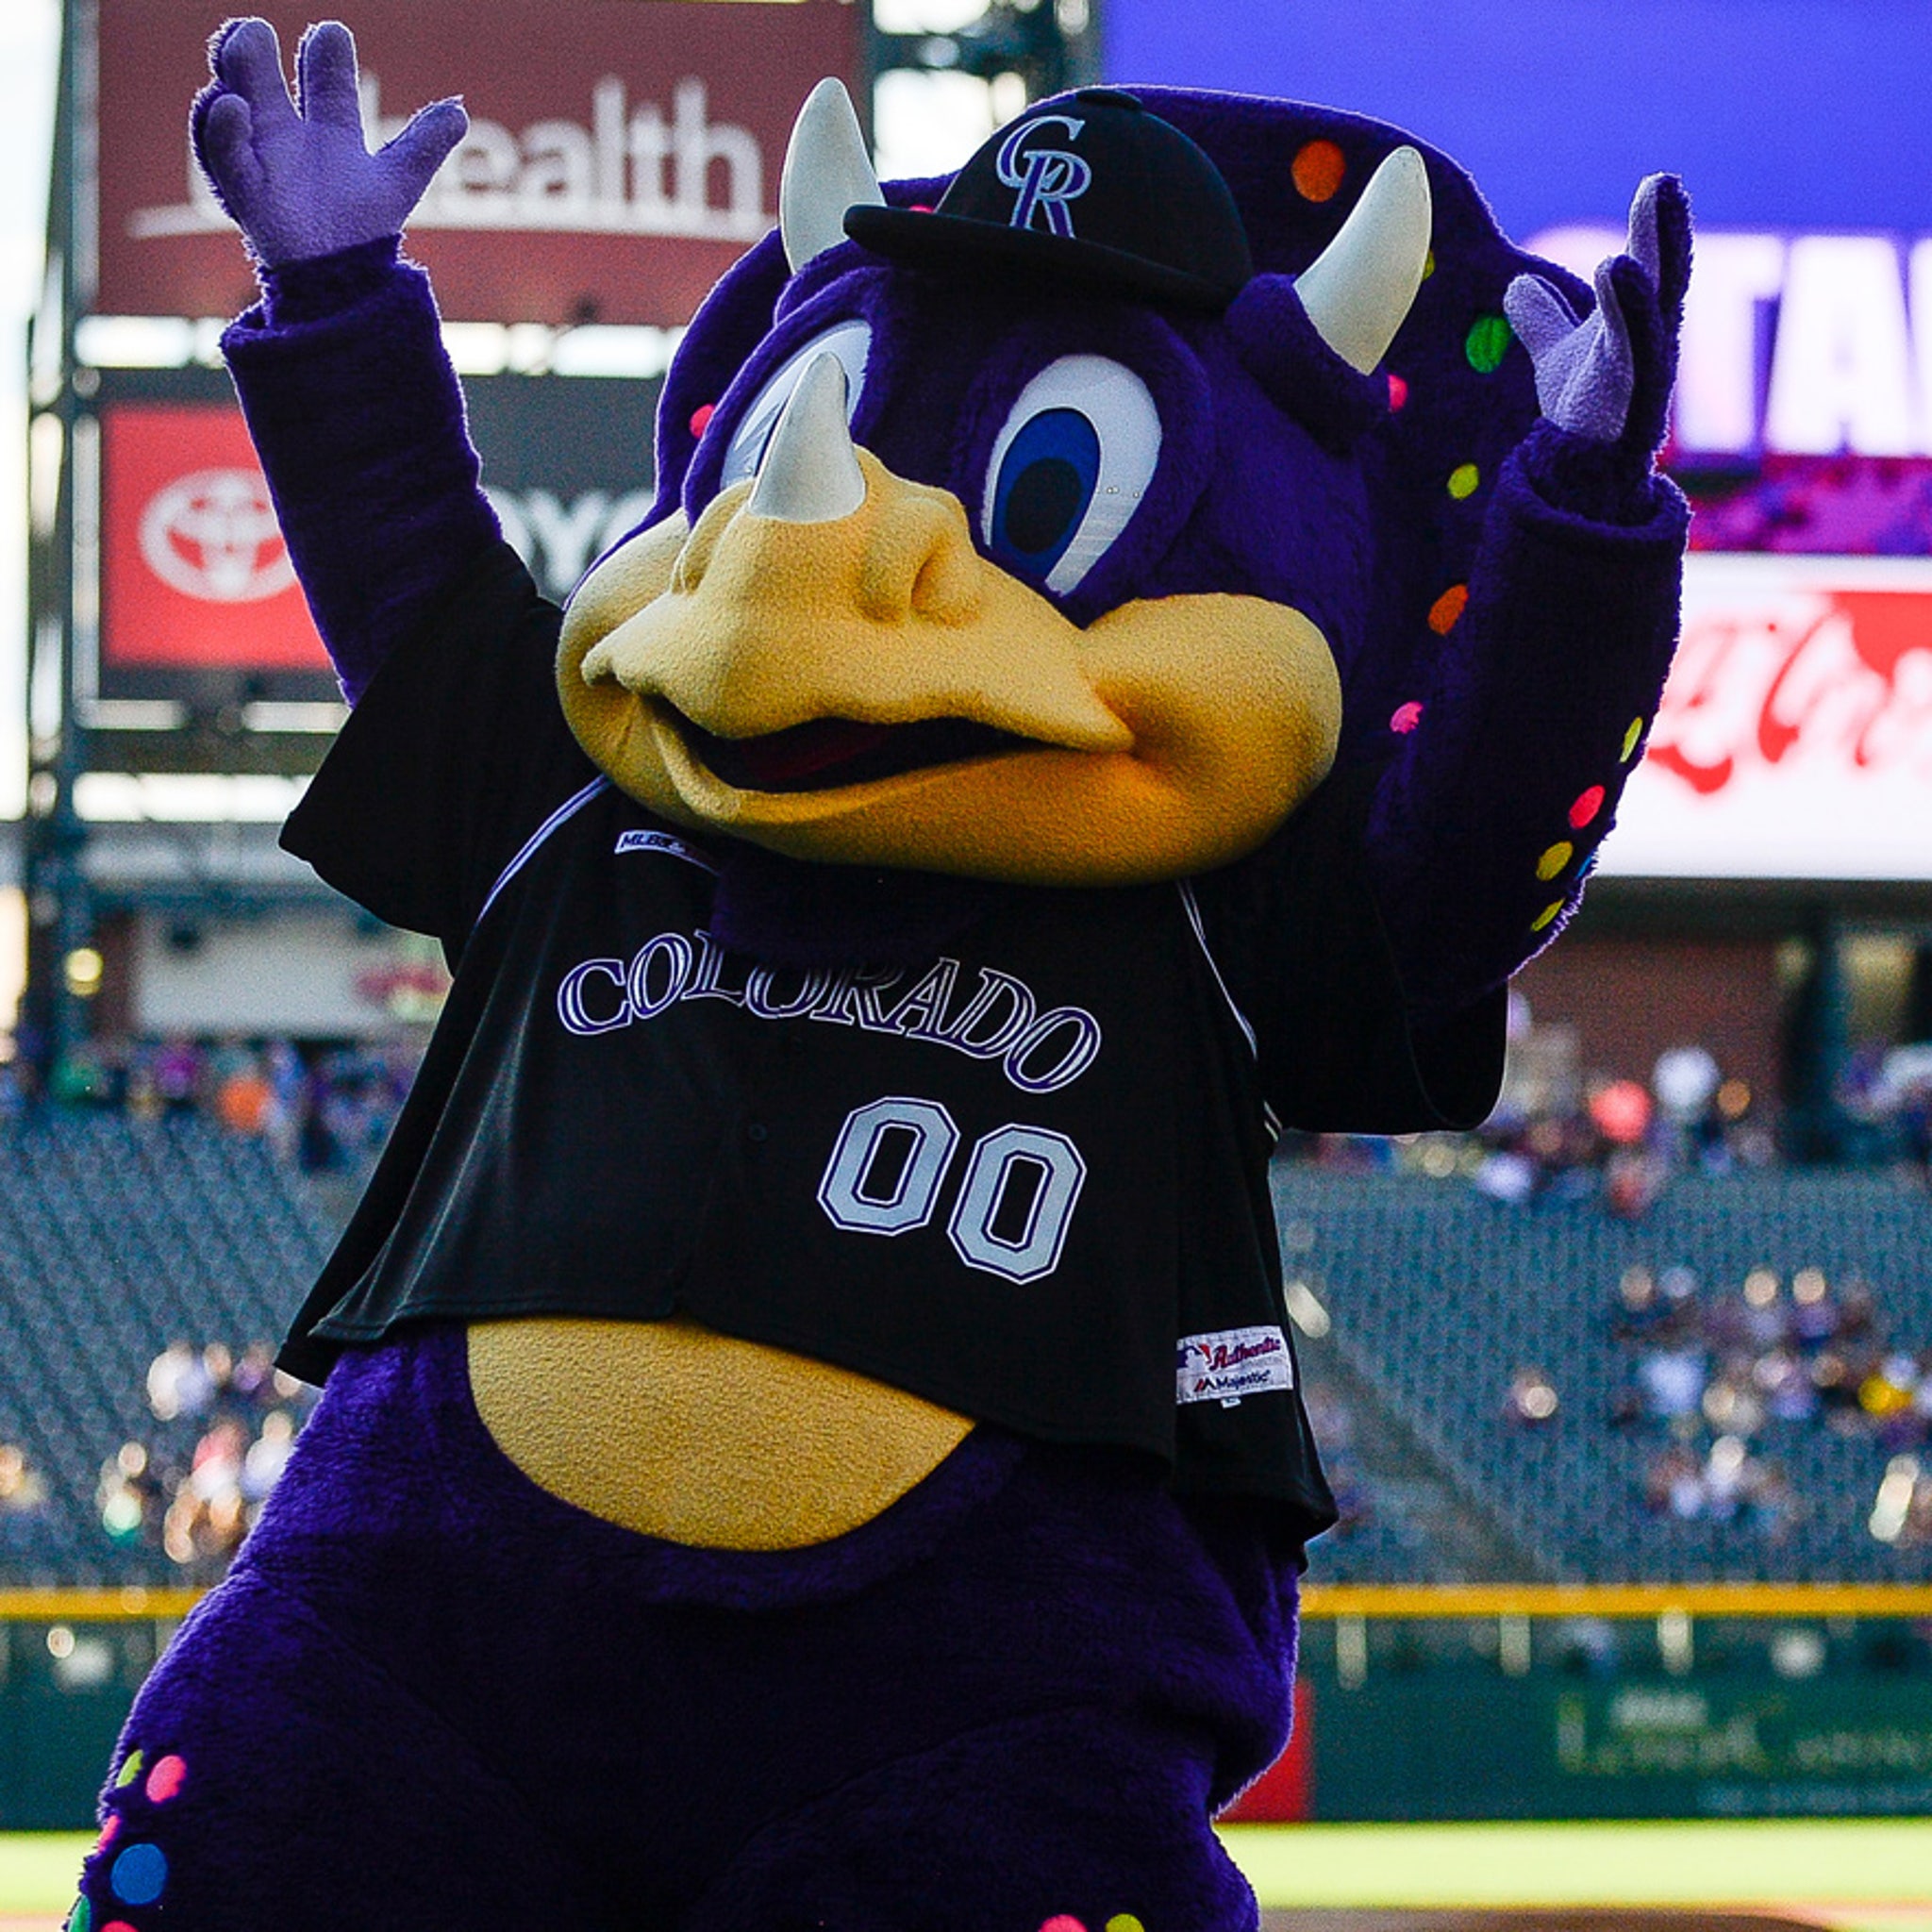 Rockies Fan Screamed Mascot's Name, Dinger, Not the N-Word, Team Confirms